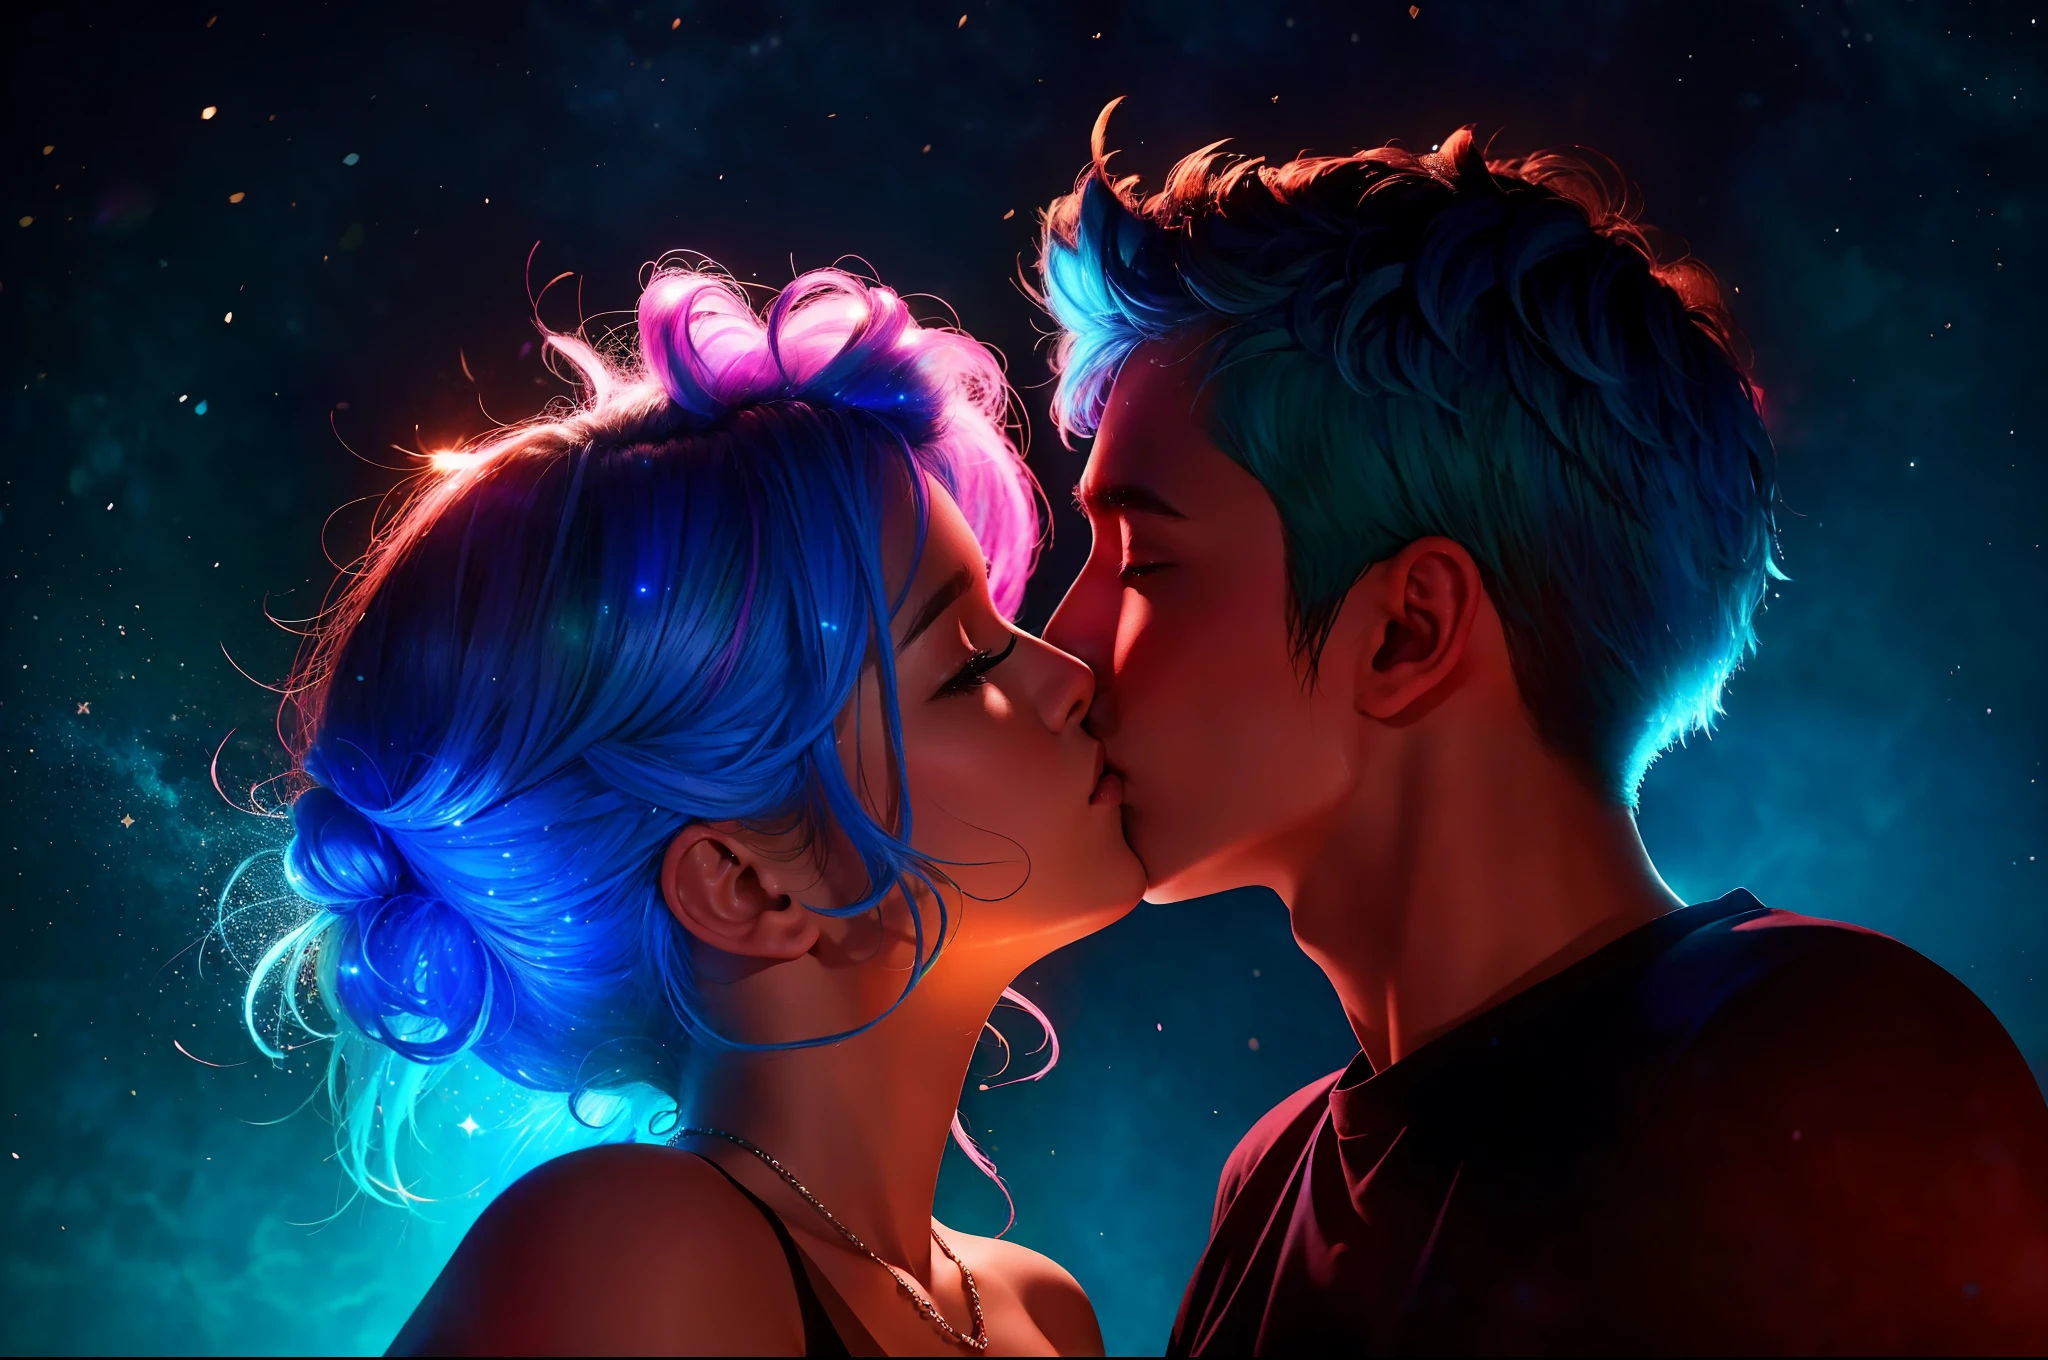 Romantic couple kissing in the wind，Blue-haired boy，Girl with pink hair，glowing stars，Glow effects，Heart-shaped bubbles，the night，On a cruise ship，fire works，The face is clear and accurate，detail in face，super-fine，beachside，16K resolution，high qulity，light，High picture detail，dynamic viewing angle，Detailed pubic hair，Epic shooting，oc rendered